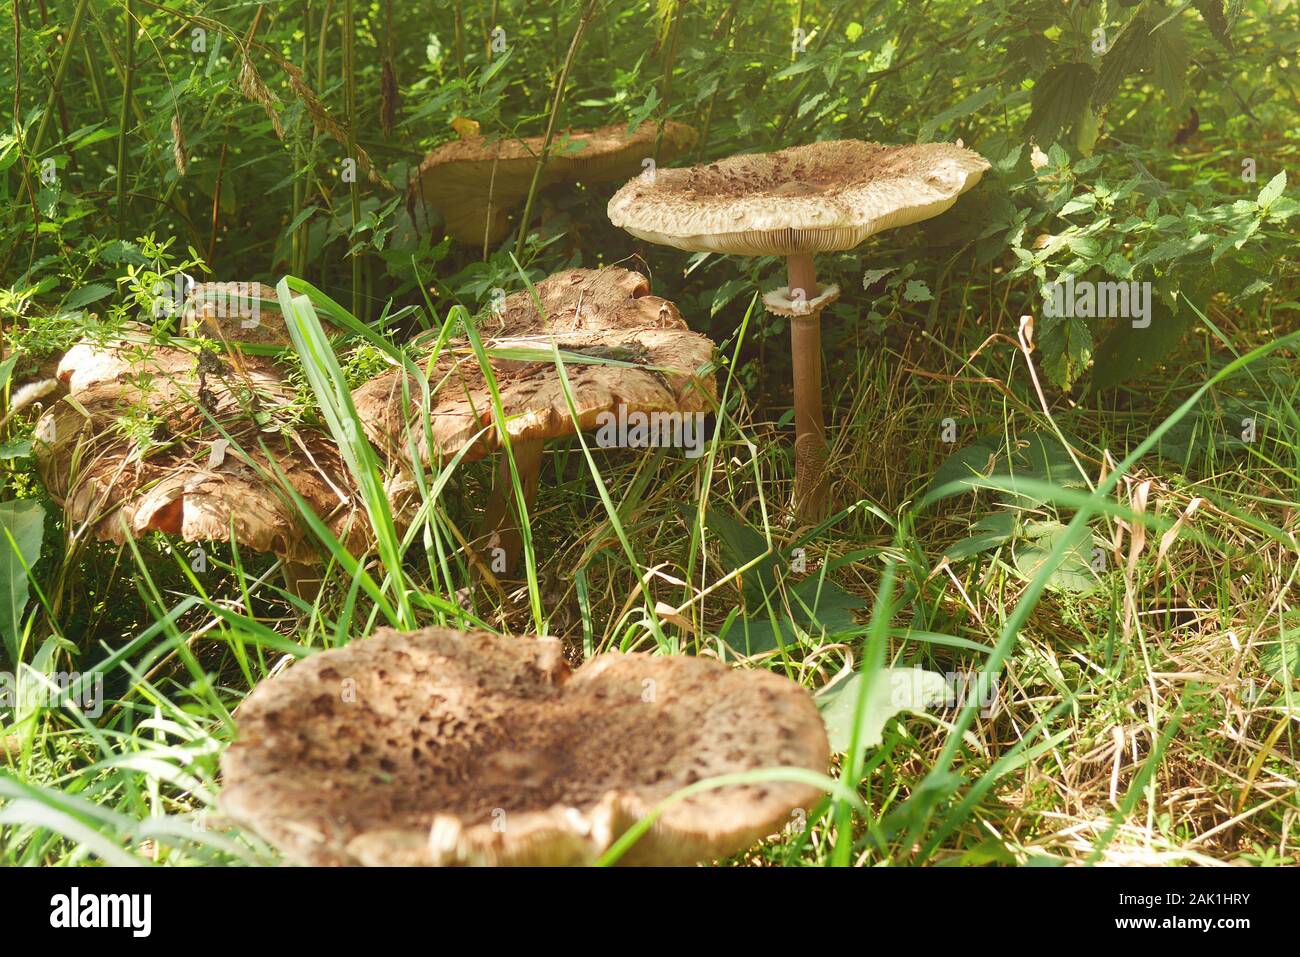 mushrooms in grass (Macrolepiota procera, the parasol mushroom) - Several large mushrooms on meadow in tall grass, sunny day Stock Photo